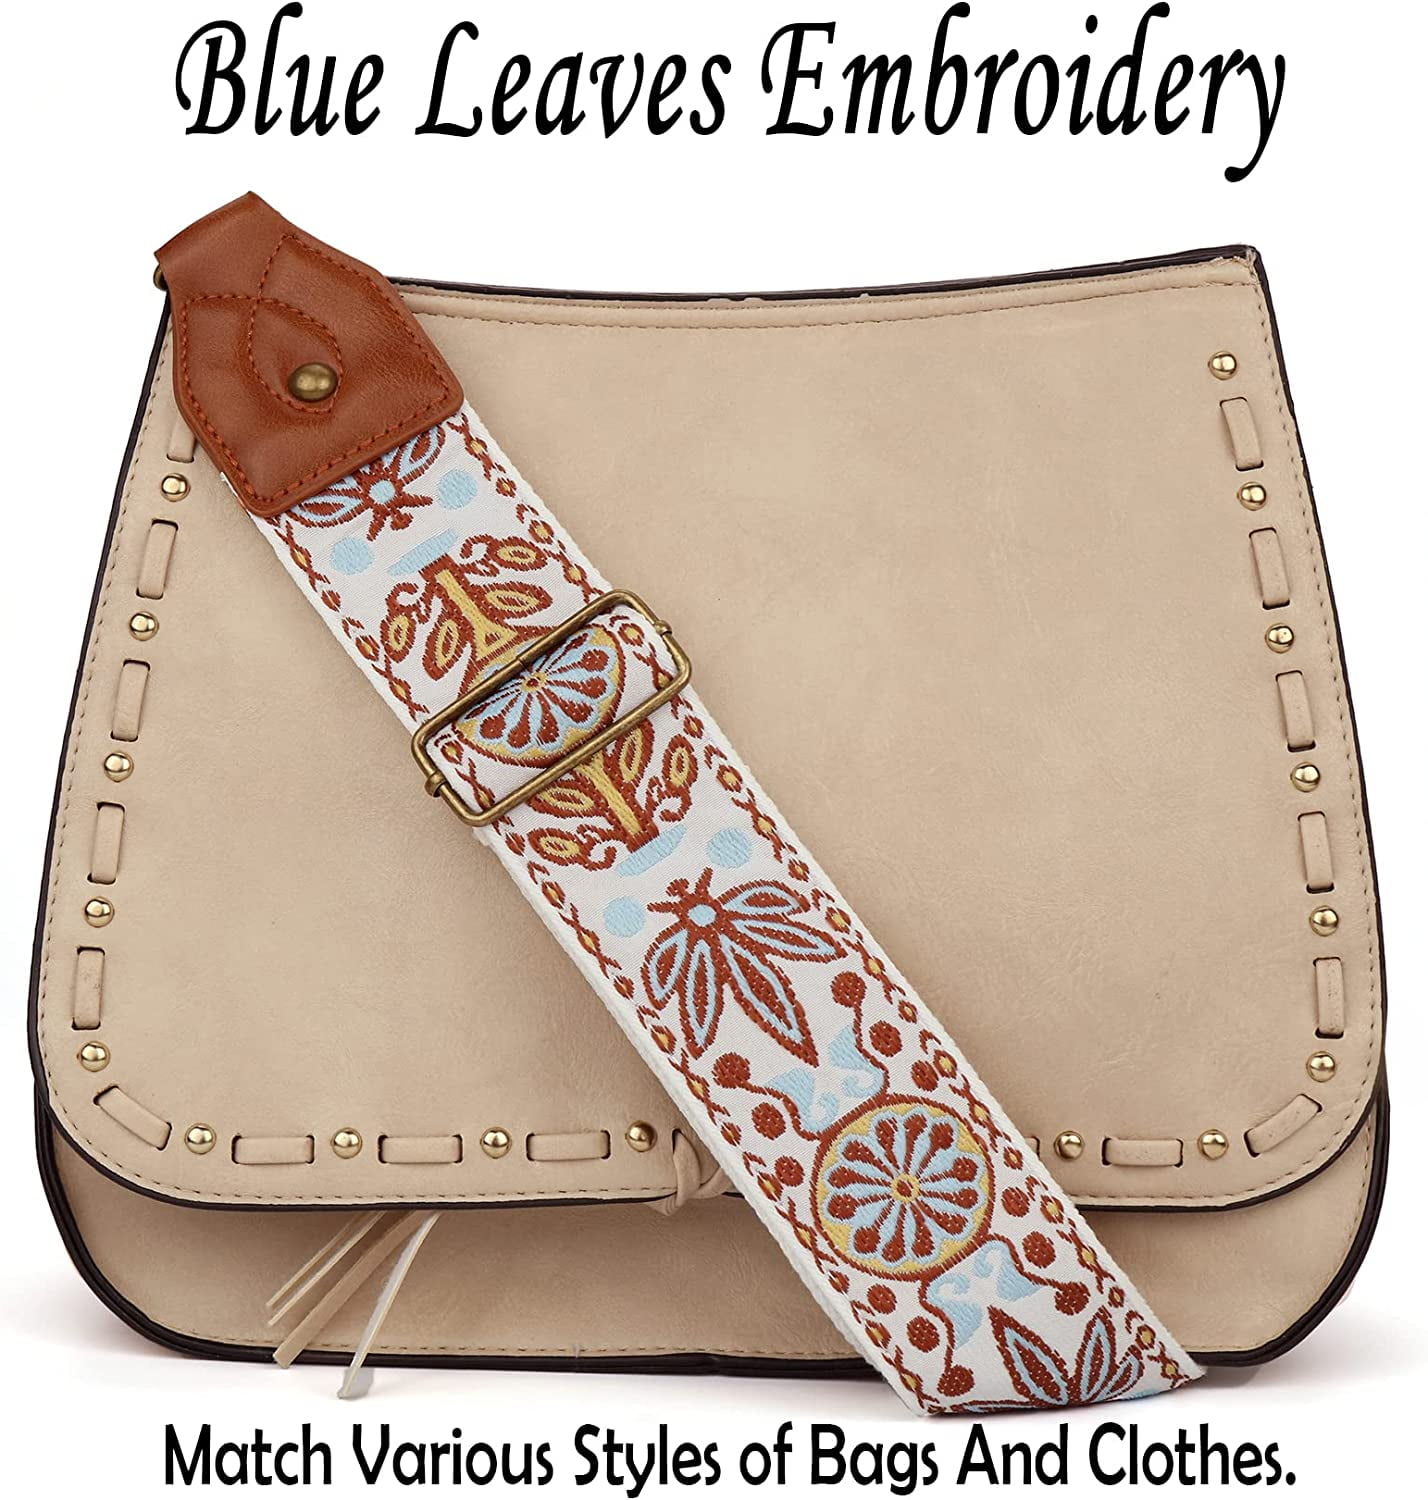  Purse Strap-2 Wide Adjustable Purse Straps Replacement  Crossbody,Jacquard Embroidery Crossbody Shoulder Straps for Crossbody Bags ,Handbags,Shoulder Bags(Embroidery Blue Flower)